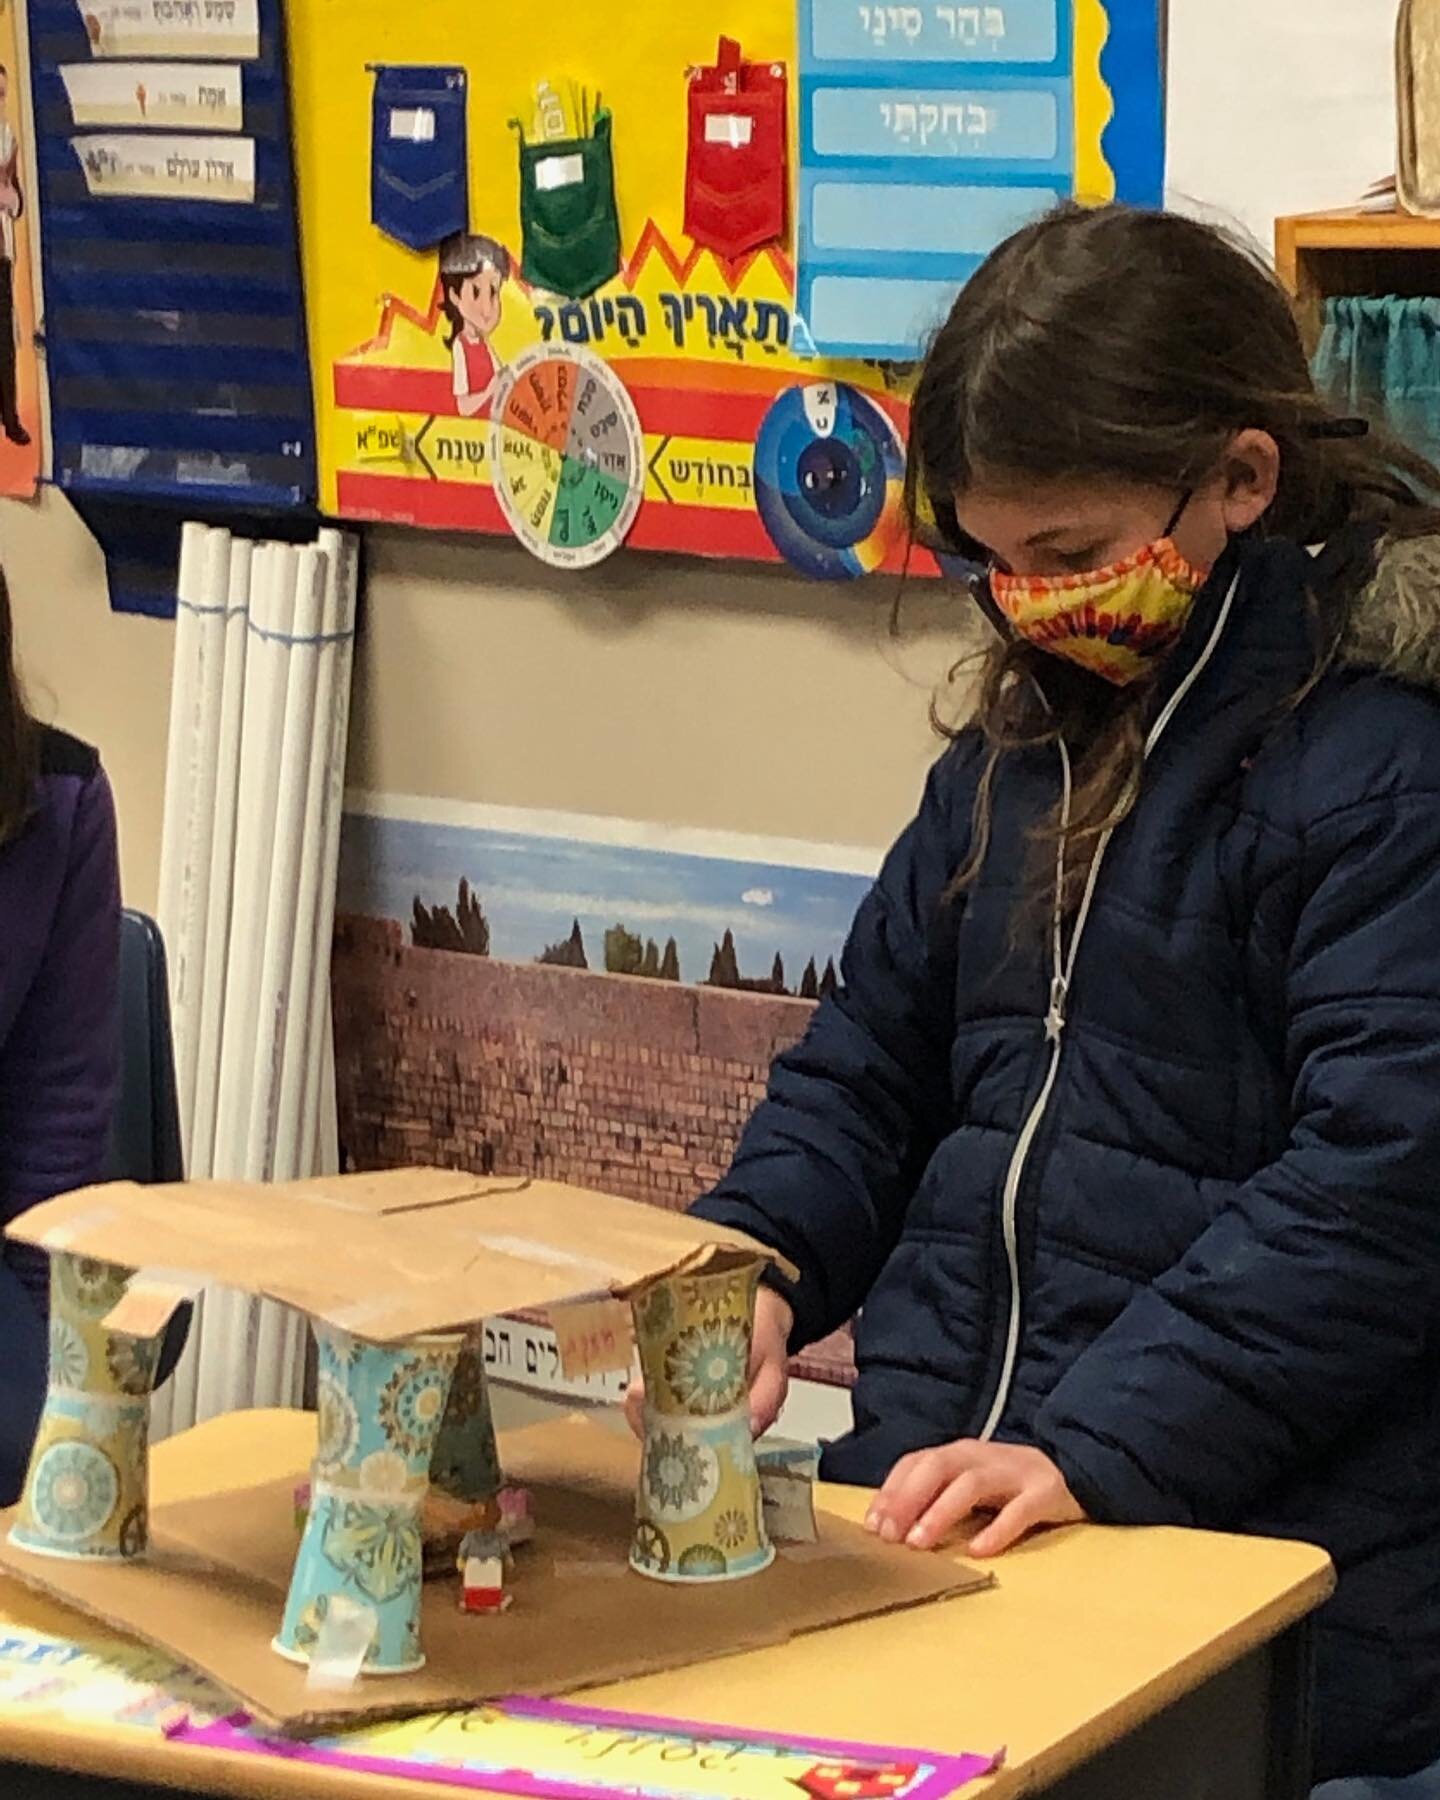 During their study Parashat Vayera in Humash, third graders learned about the mitzvah of hakhnesat orhim, welcoming guests. 

Third graders designed creative models of Avraham and Sarah's tent, incorporating elements highlighted in the Midrash: The t